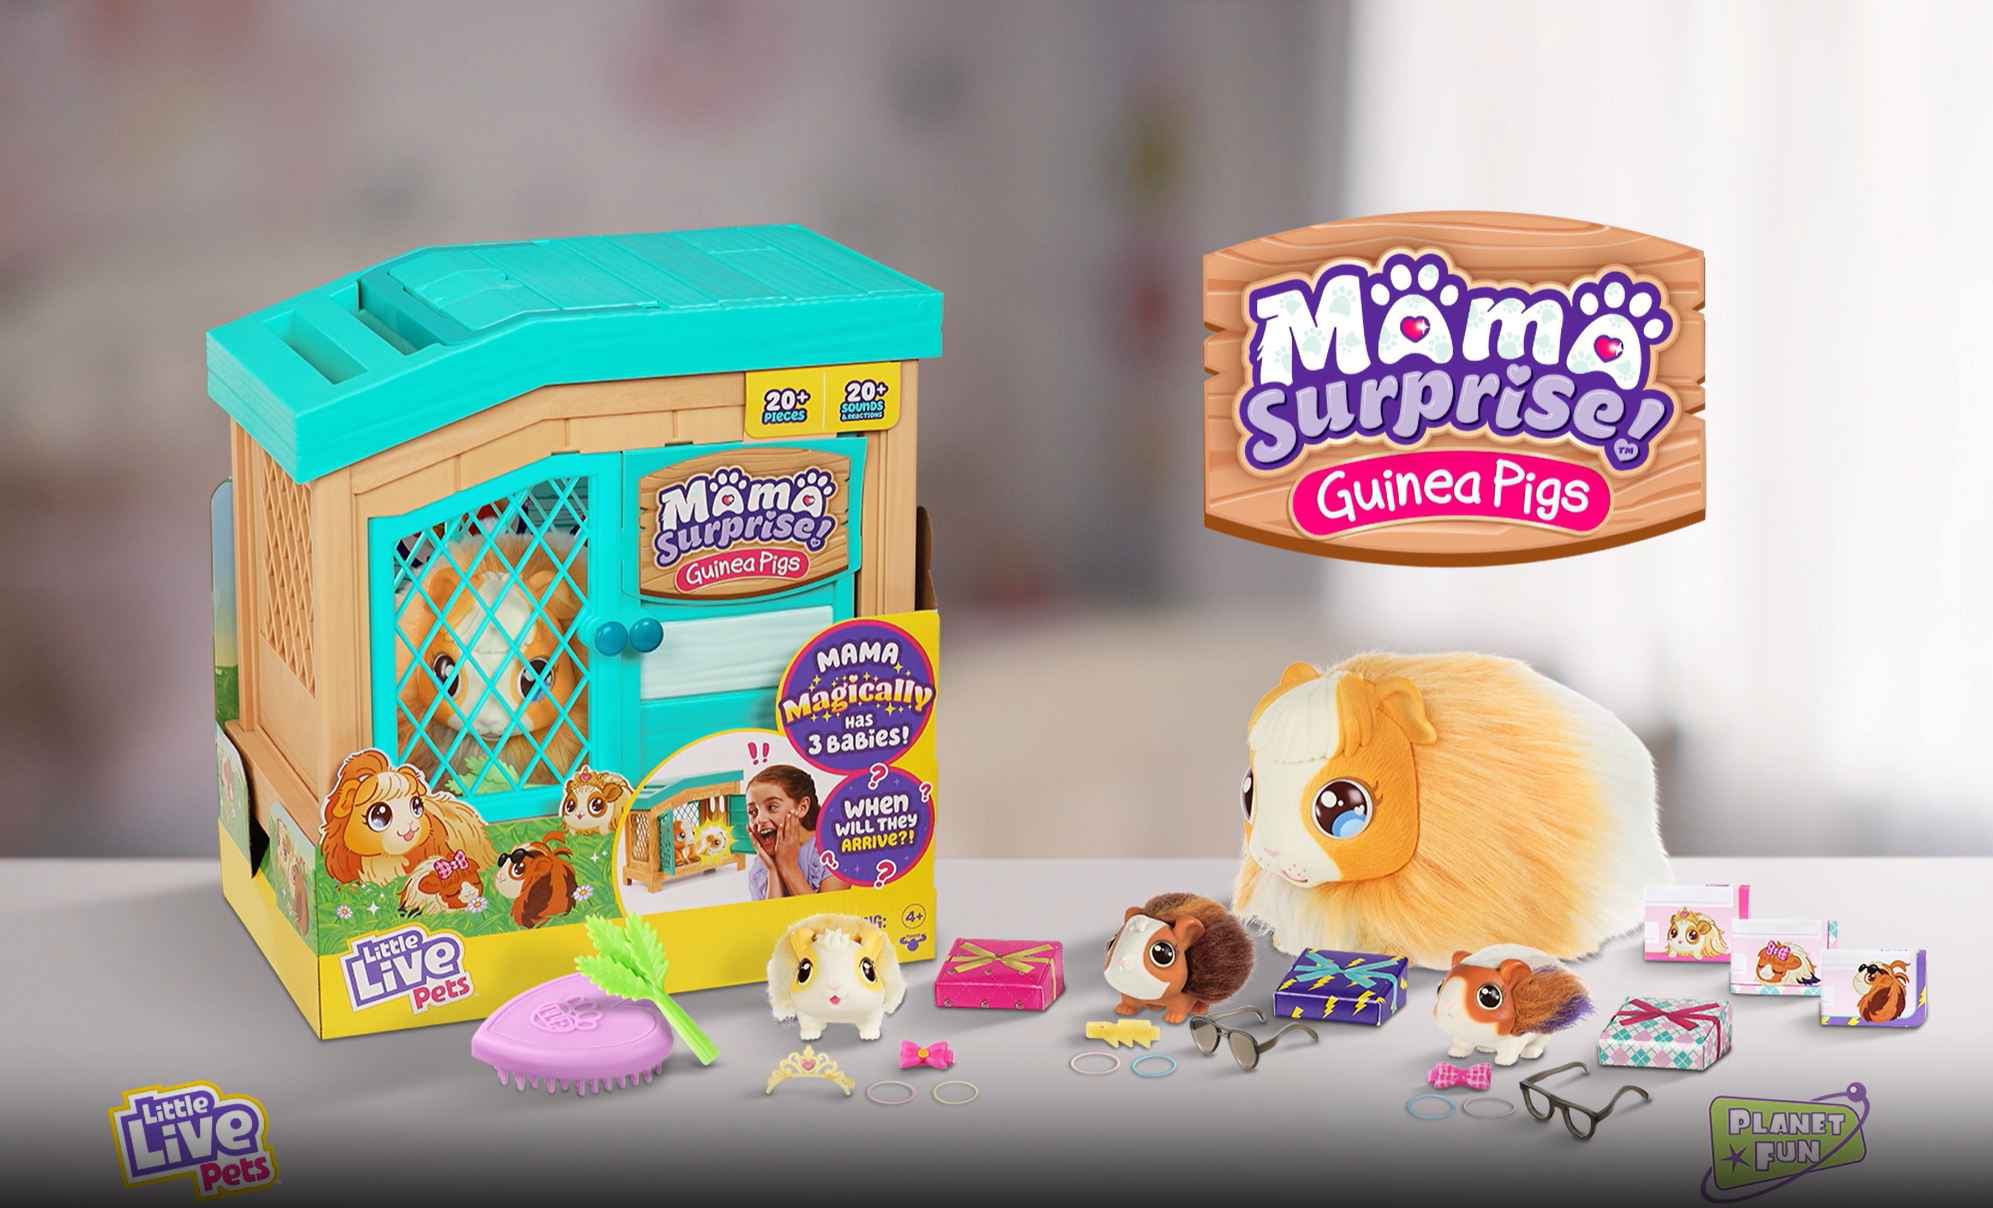 Mama Surprise takes caring for your pet to a whole new level.